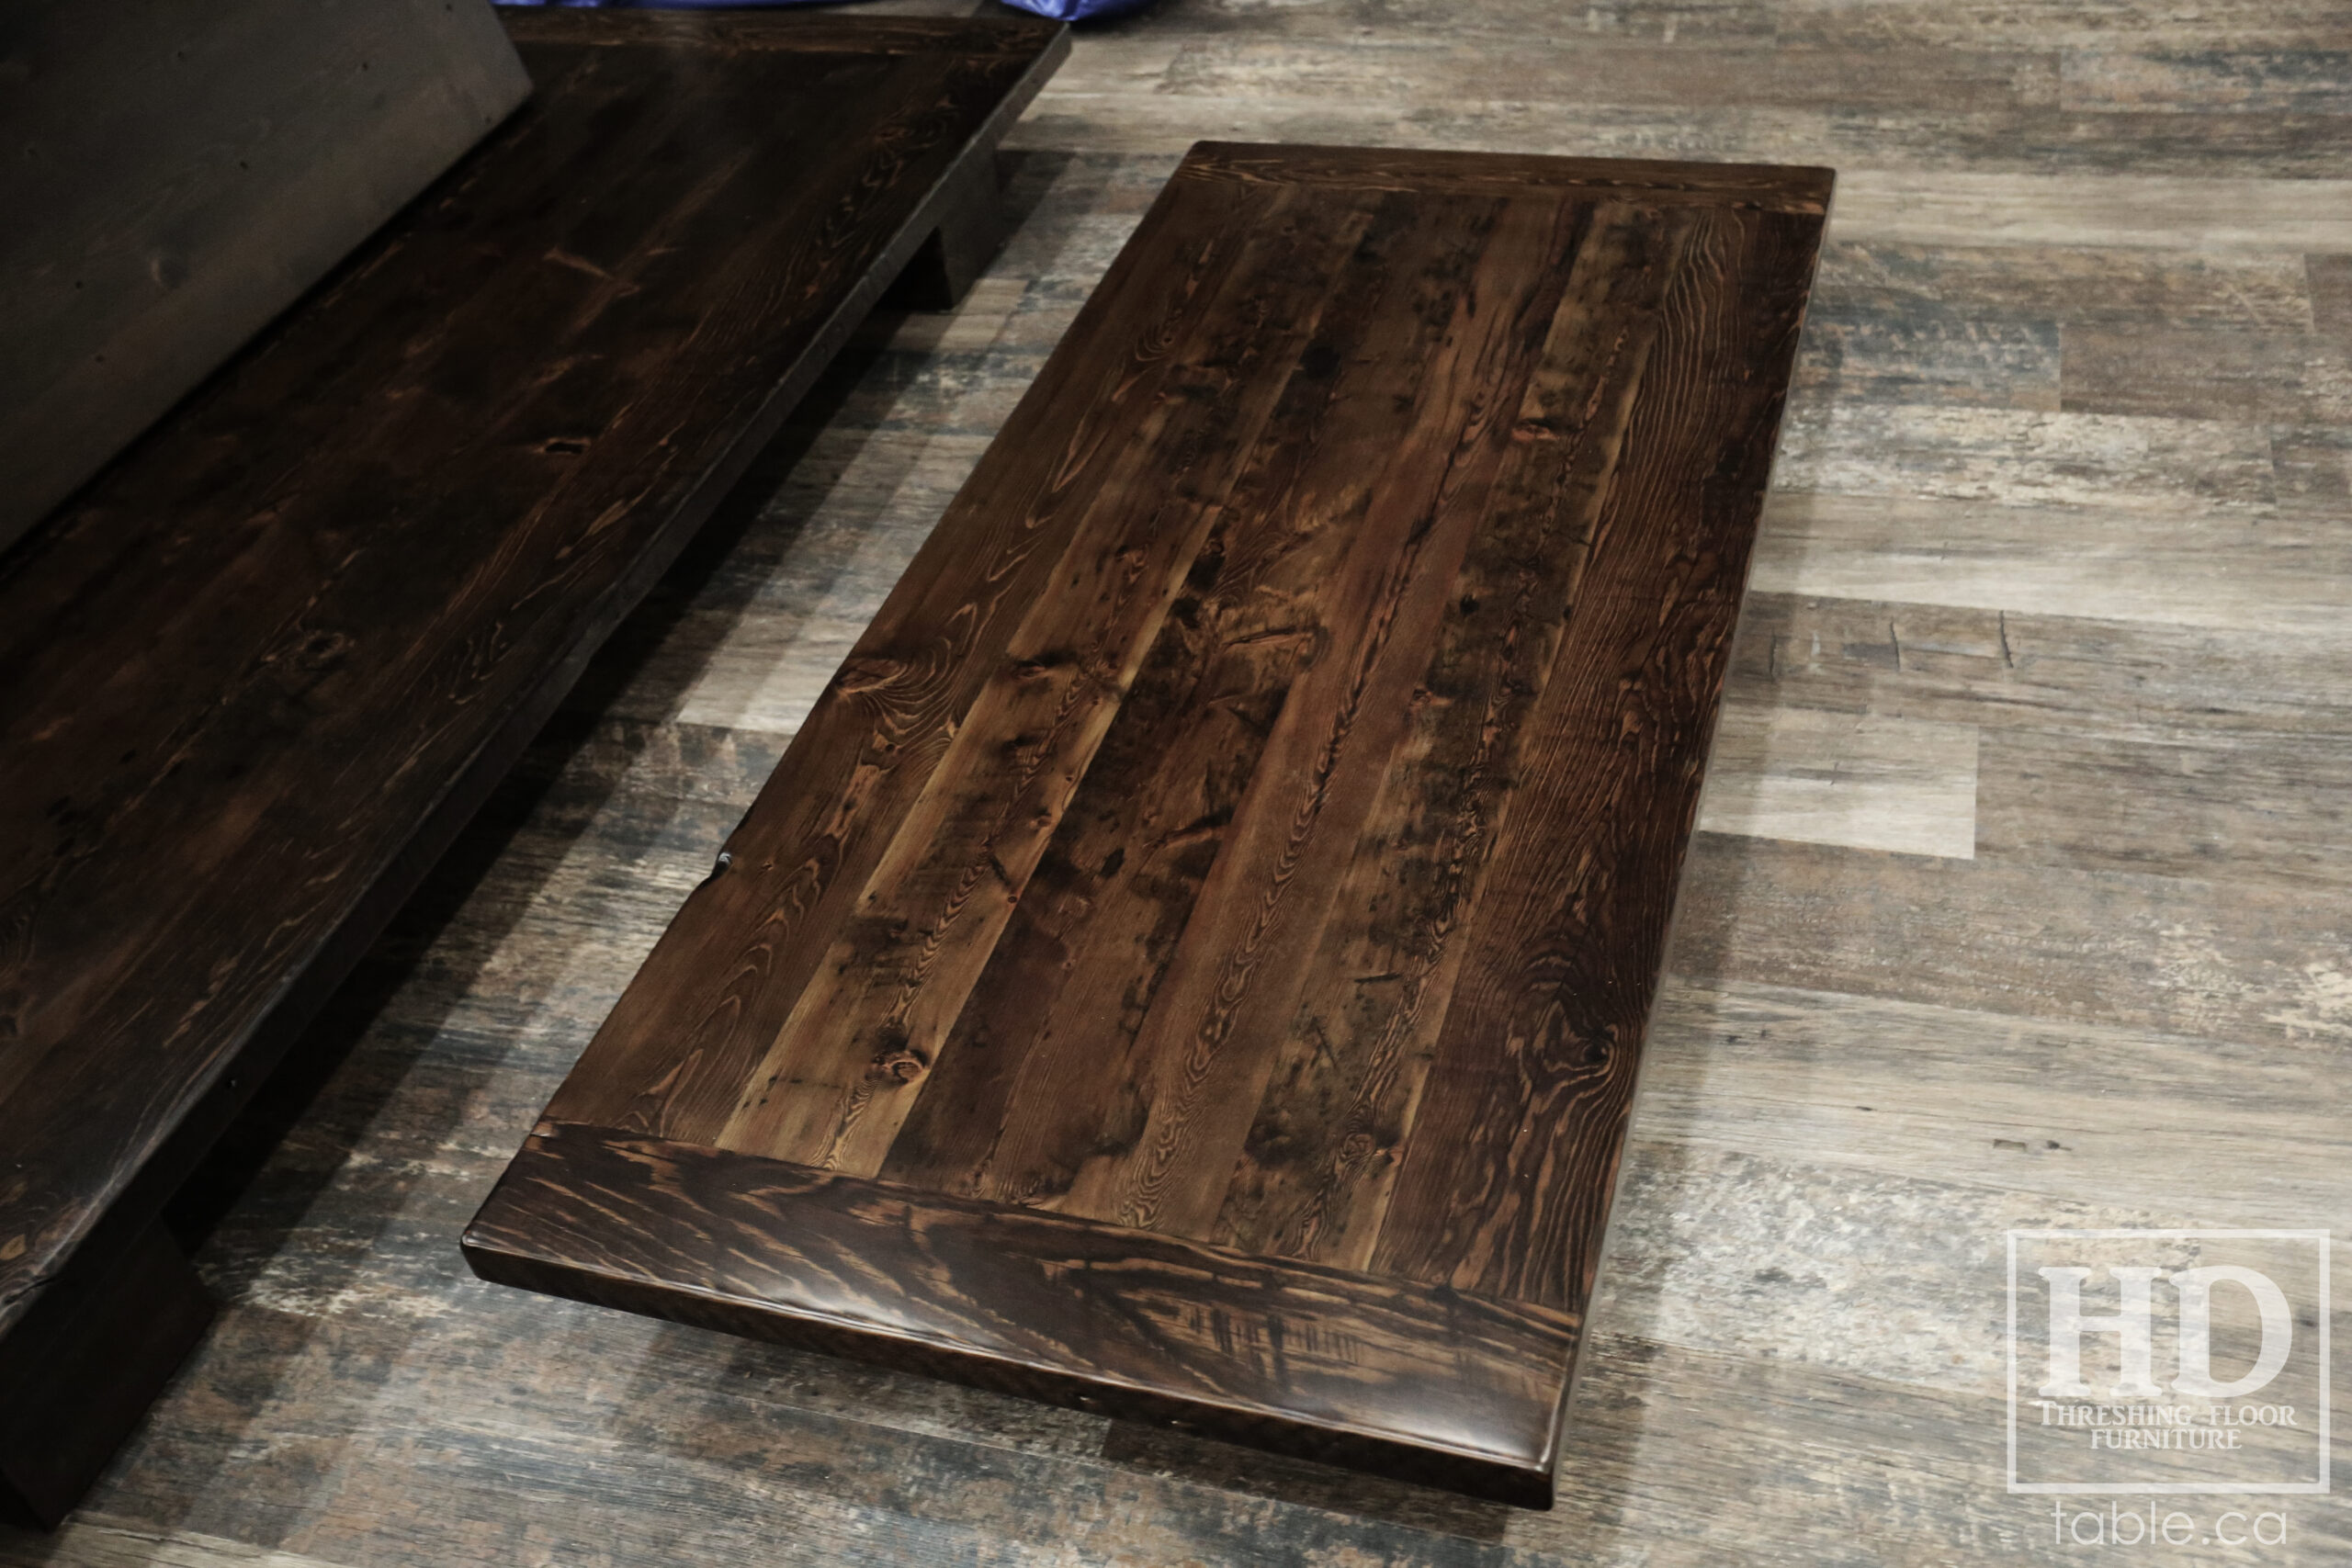 Ontario Barnwood Platform Style Coffee Tables we made for a Parry Sound home - 42" x 29" &  5'6" x 29" - 8" height  - Reclaimed Old Growth Hemlock Threshing Floor Construction - Original edges & distressing maintained - Black Stain Option - Premium epoxy + satin polyurethane finish - www.table.ca